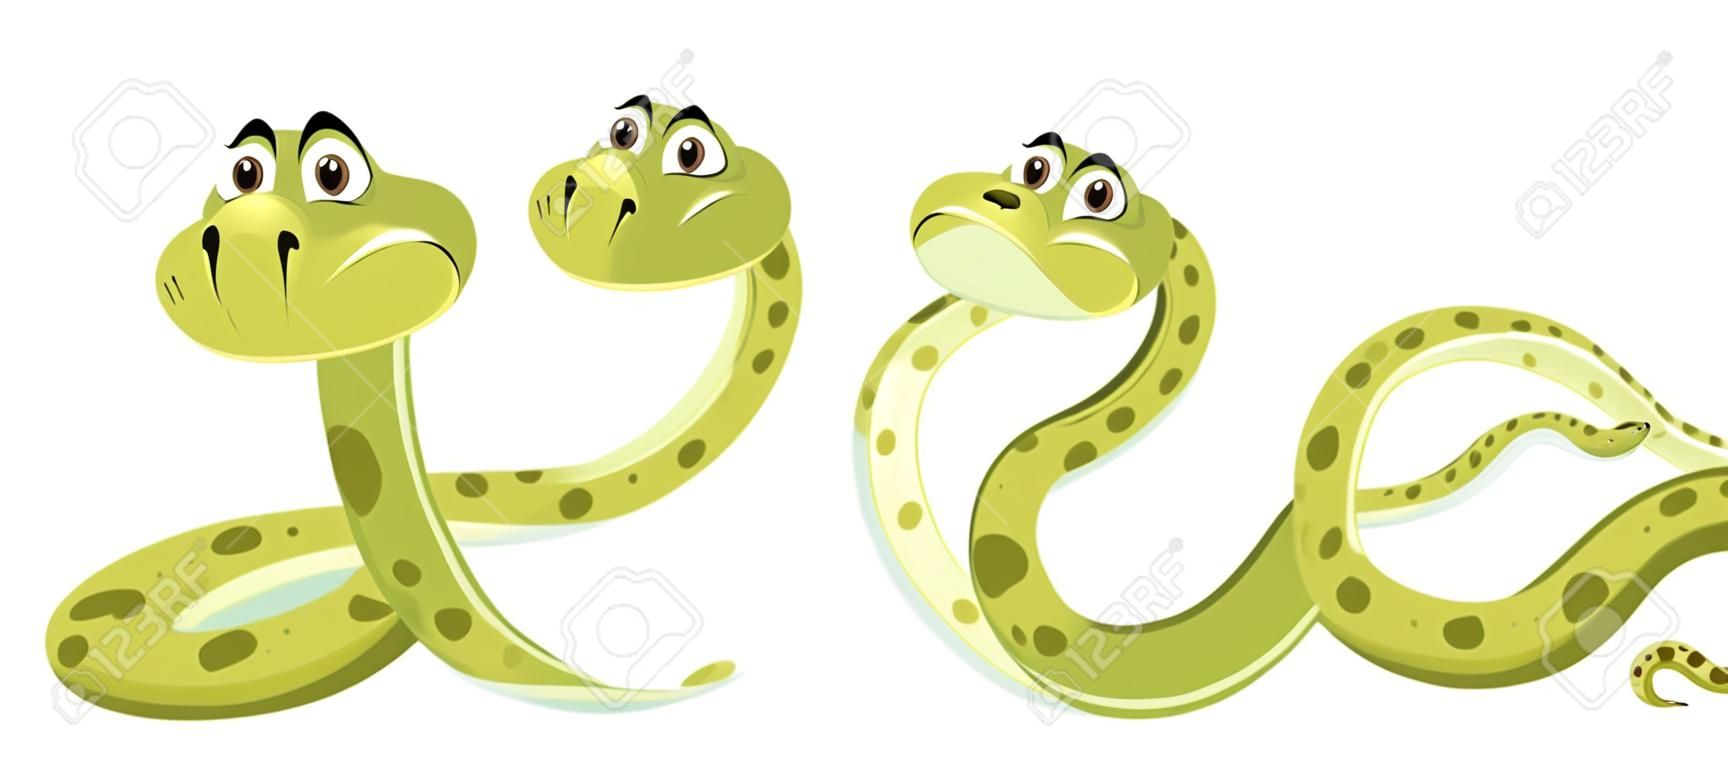 Snake with different position illustration